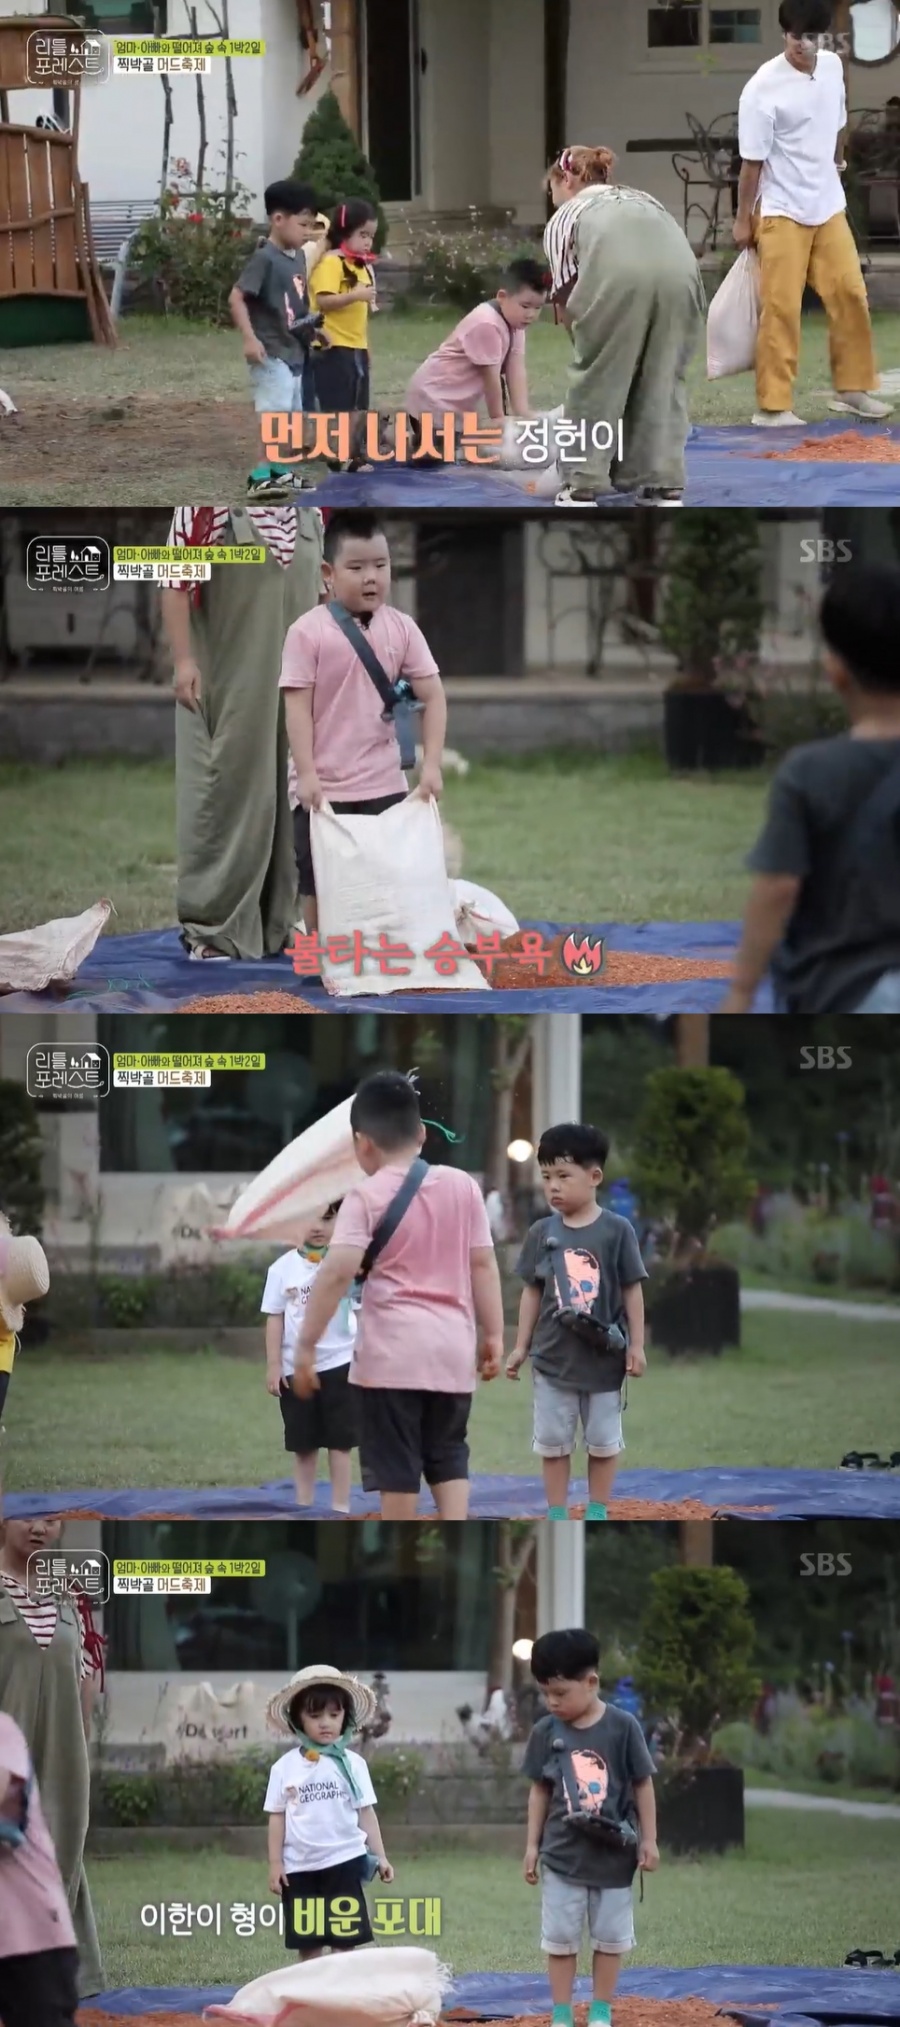 SBS Little Forest Lee Han and Kim Jin-hee played a combination as a brother.On the 27th, SBS Little Forest held a Mud Festival.Lee Seung-gi found the loess left in the accommodation and suggested mud play.As it is mud that helps emotional stability and brain development, Park Narae, Jung Somin, and Lee Seung-gi sprinkled yellow soil on waterproof cloths for children and the children helped sprinkle yellow soil with excitement.Kim Jin-heen and Lee Han voluntarily volunteered for heavy loess sprinkling as the first and second brothers and laughed with strange nervous warfare.Lee Seung-gi praised Is the strongest person here? And Lee was proud to unpack.Kim Jin-heen was praised for his combination play, which was a combination of strength and sense, cleaning up the bag that he wrote while watching this.On the other hand, Lee Hyun, who was reluctant to soil, took off his shoes first and stepped on the loess and gave a smile.